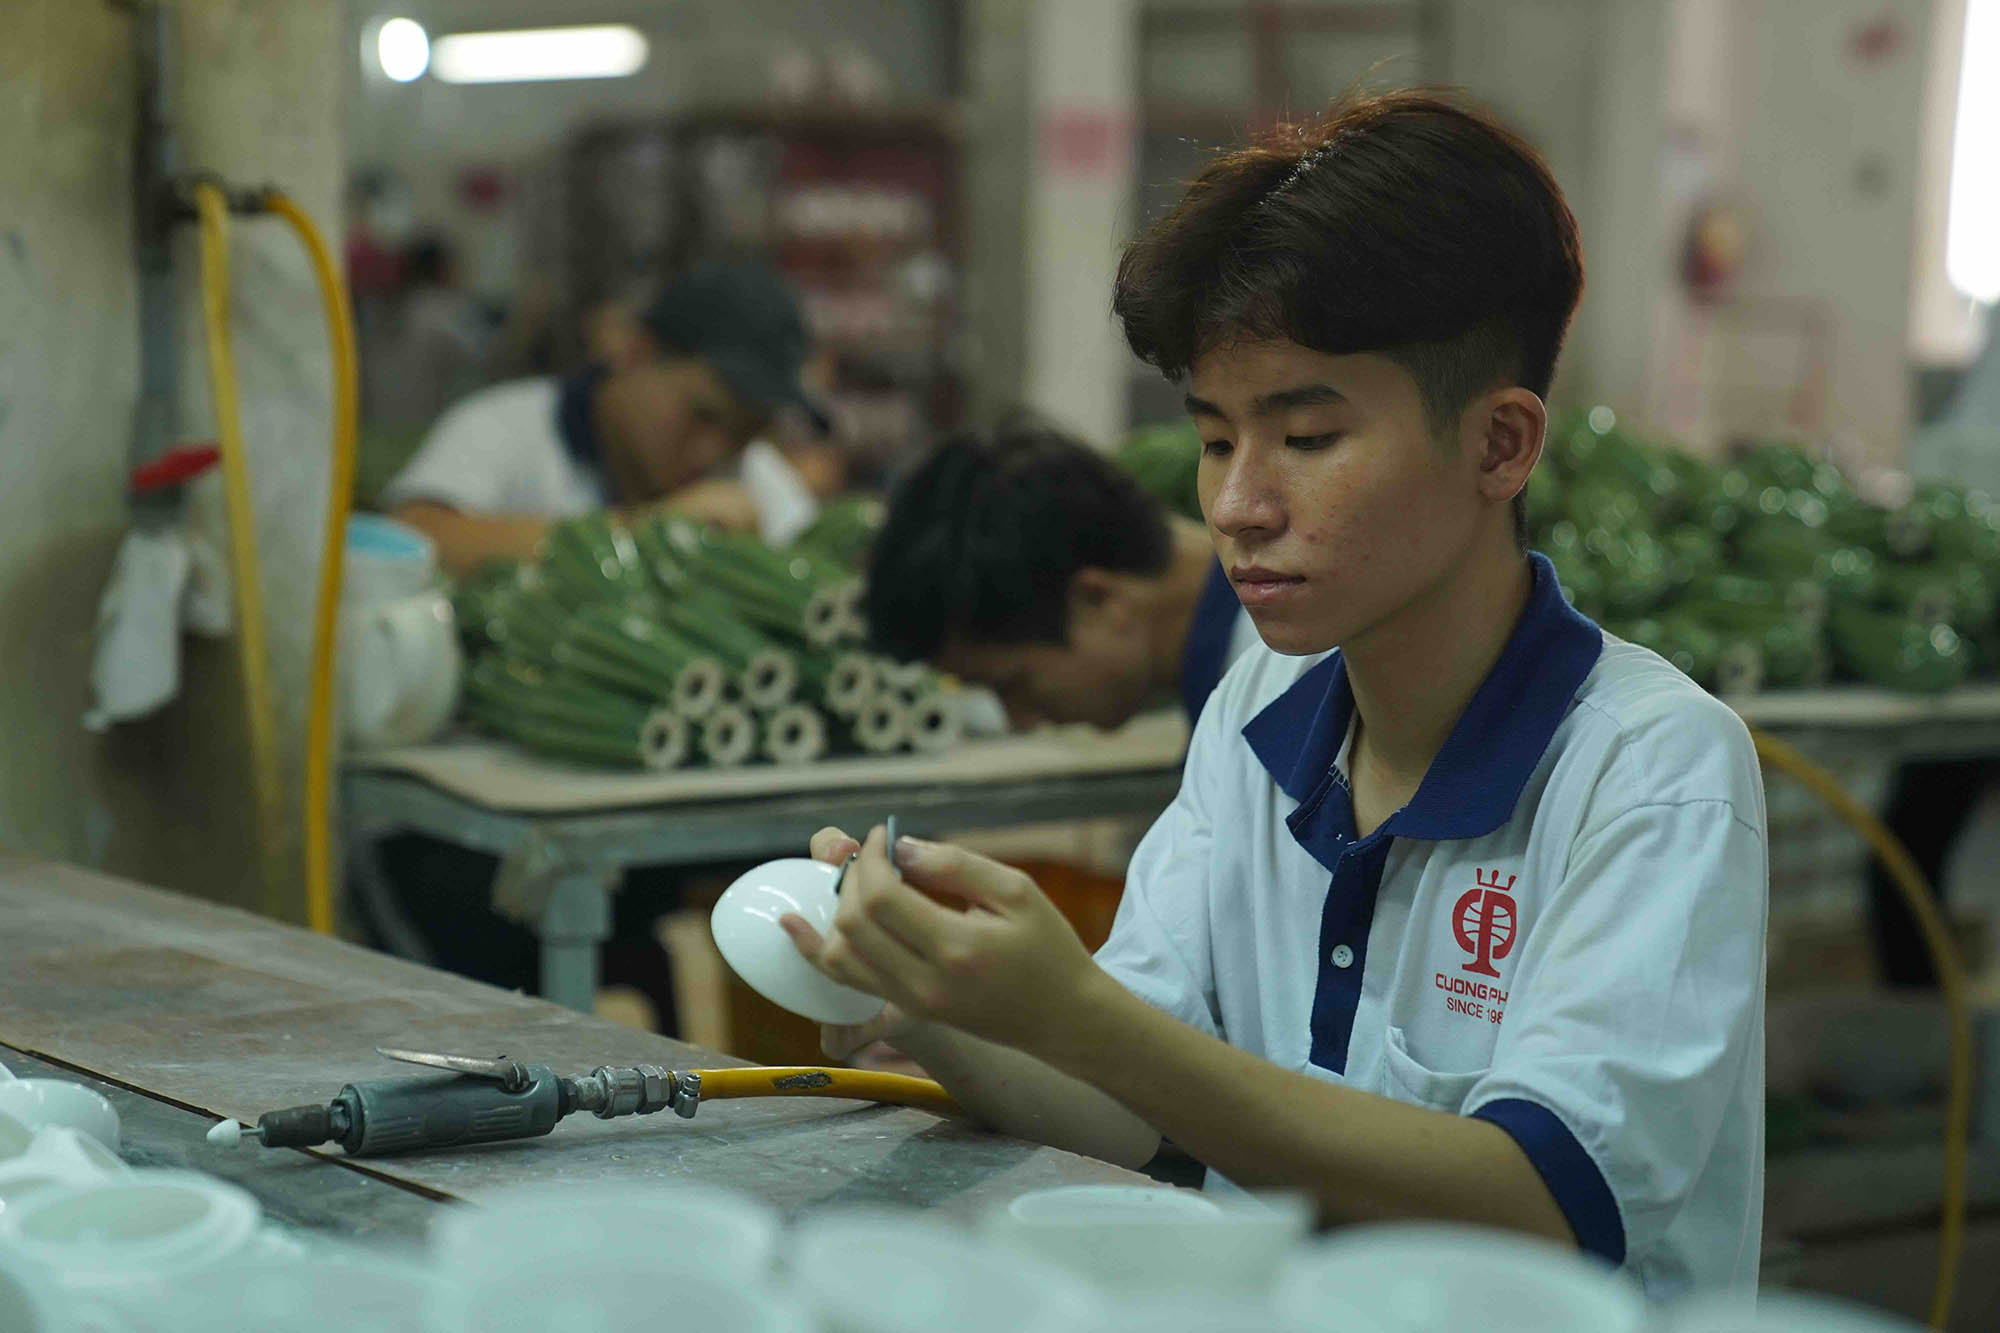 'Children's Voices' Short Film: A Vietnam Factory Giving Youth a Second Chance at Education